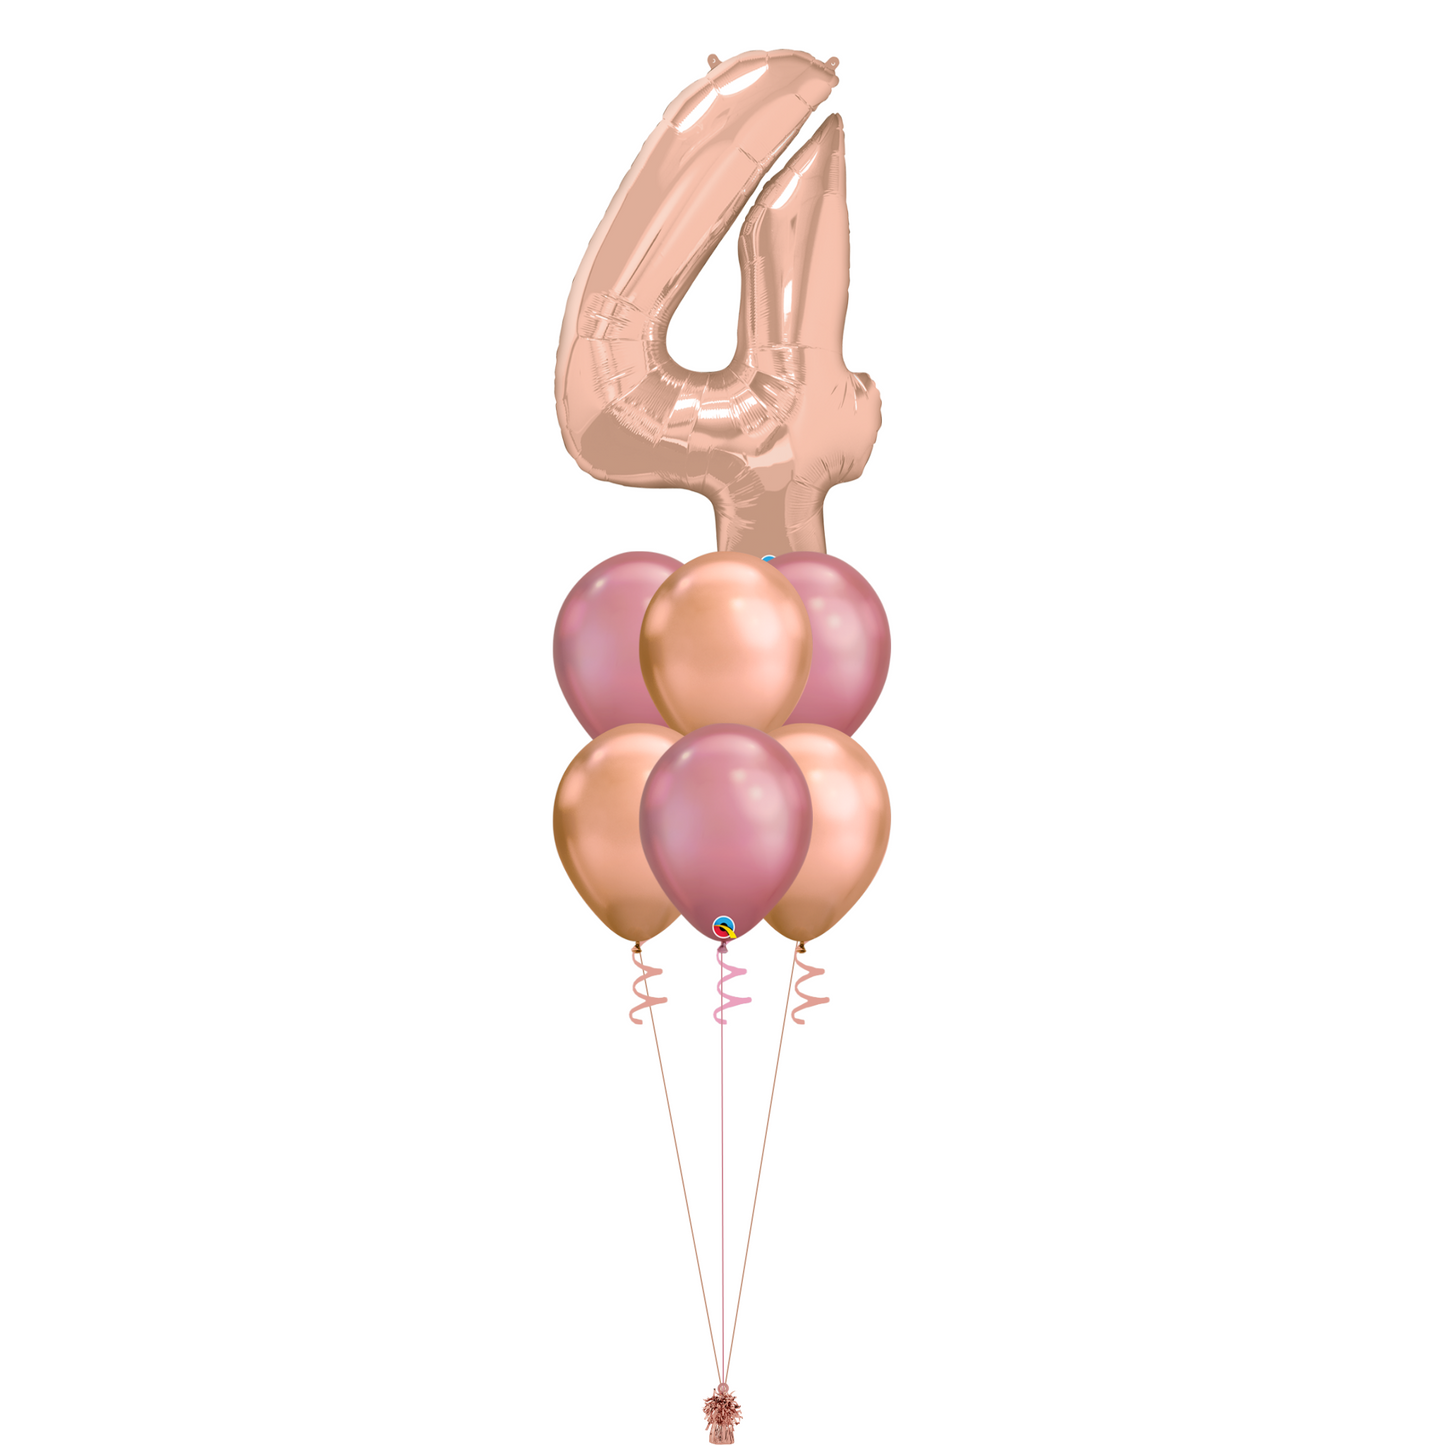 Bouquet of 7 Balloons - Rose Gold & Mauve